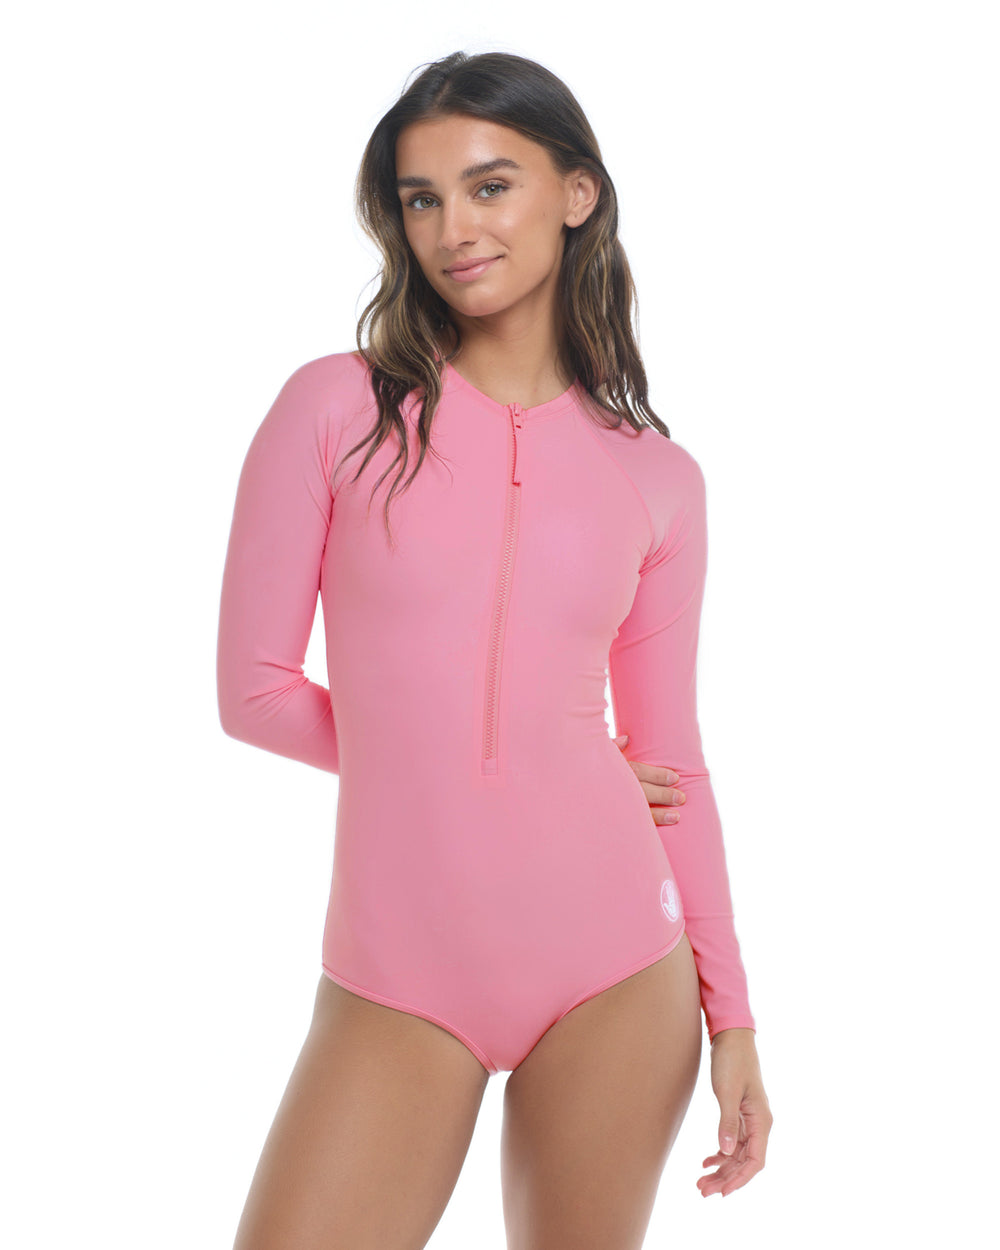 Body Glove Women's Smoothies Chanel One Piece Swimsuit Paddle Suit - Pitaya Large 